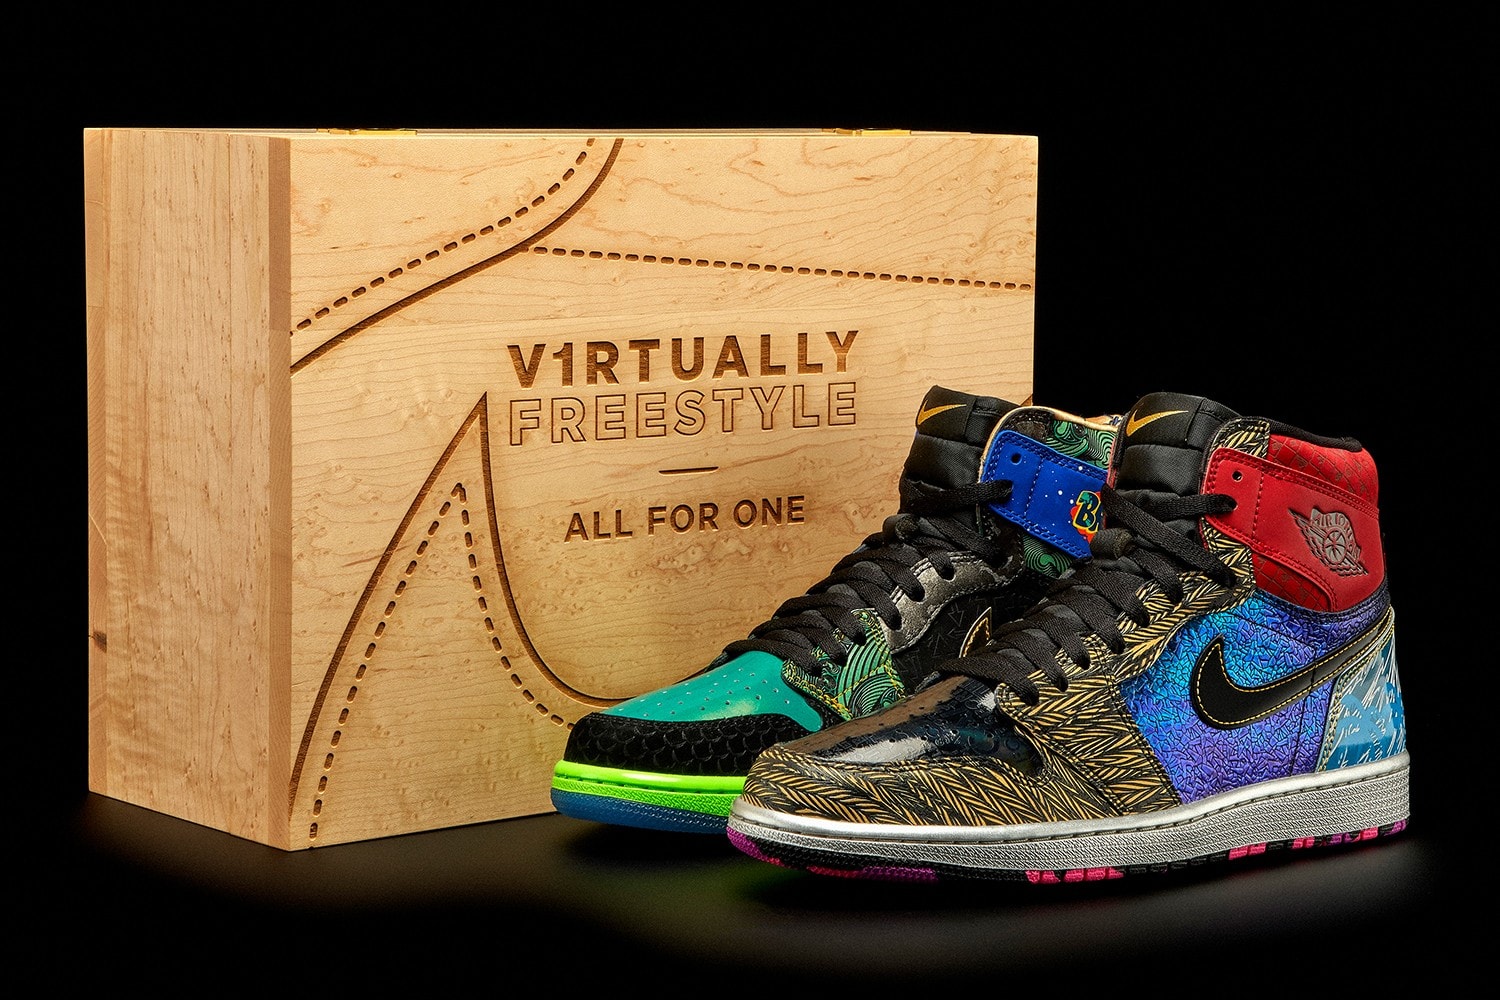 Nike Nike Air Jordan 5 Retro Doernbecher  Size 11 Available For Immediate  Sale At Sotheby's